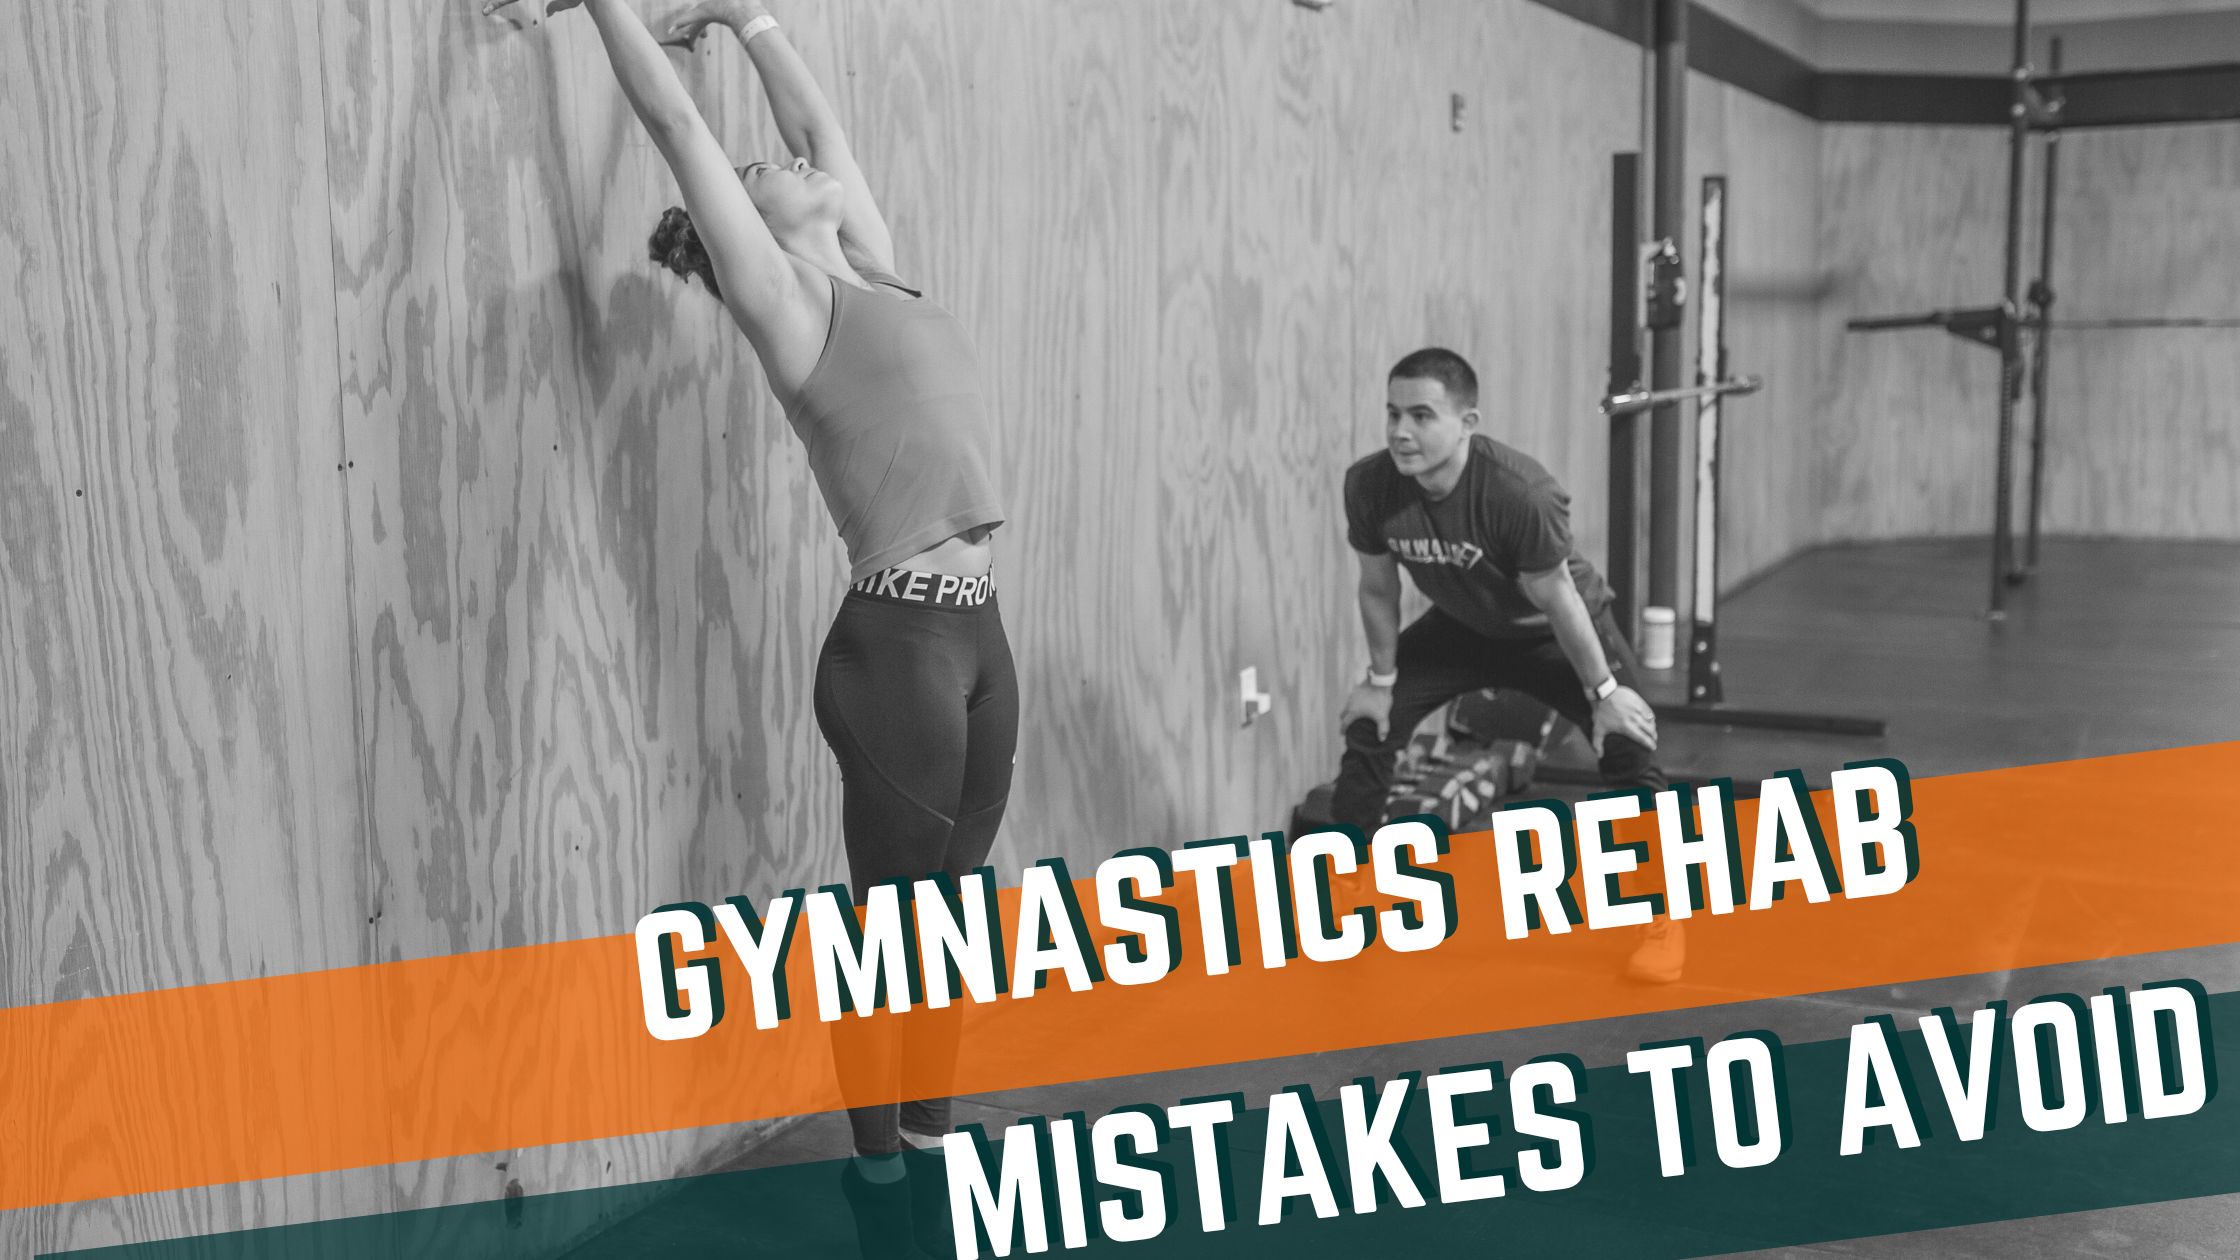 Featured image for “The 3 Most Common Mistakes In Gymnastics Physical Therapy”